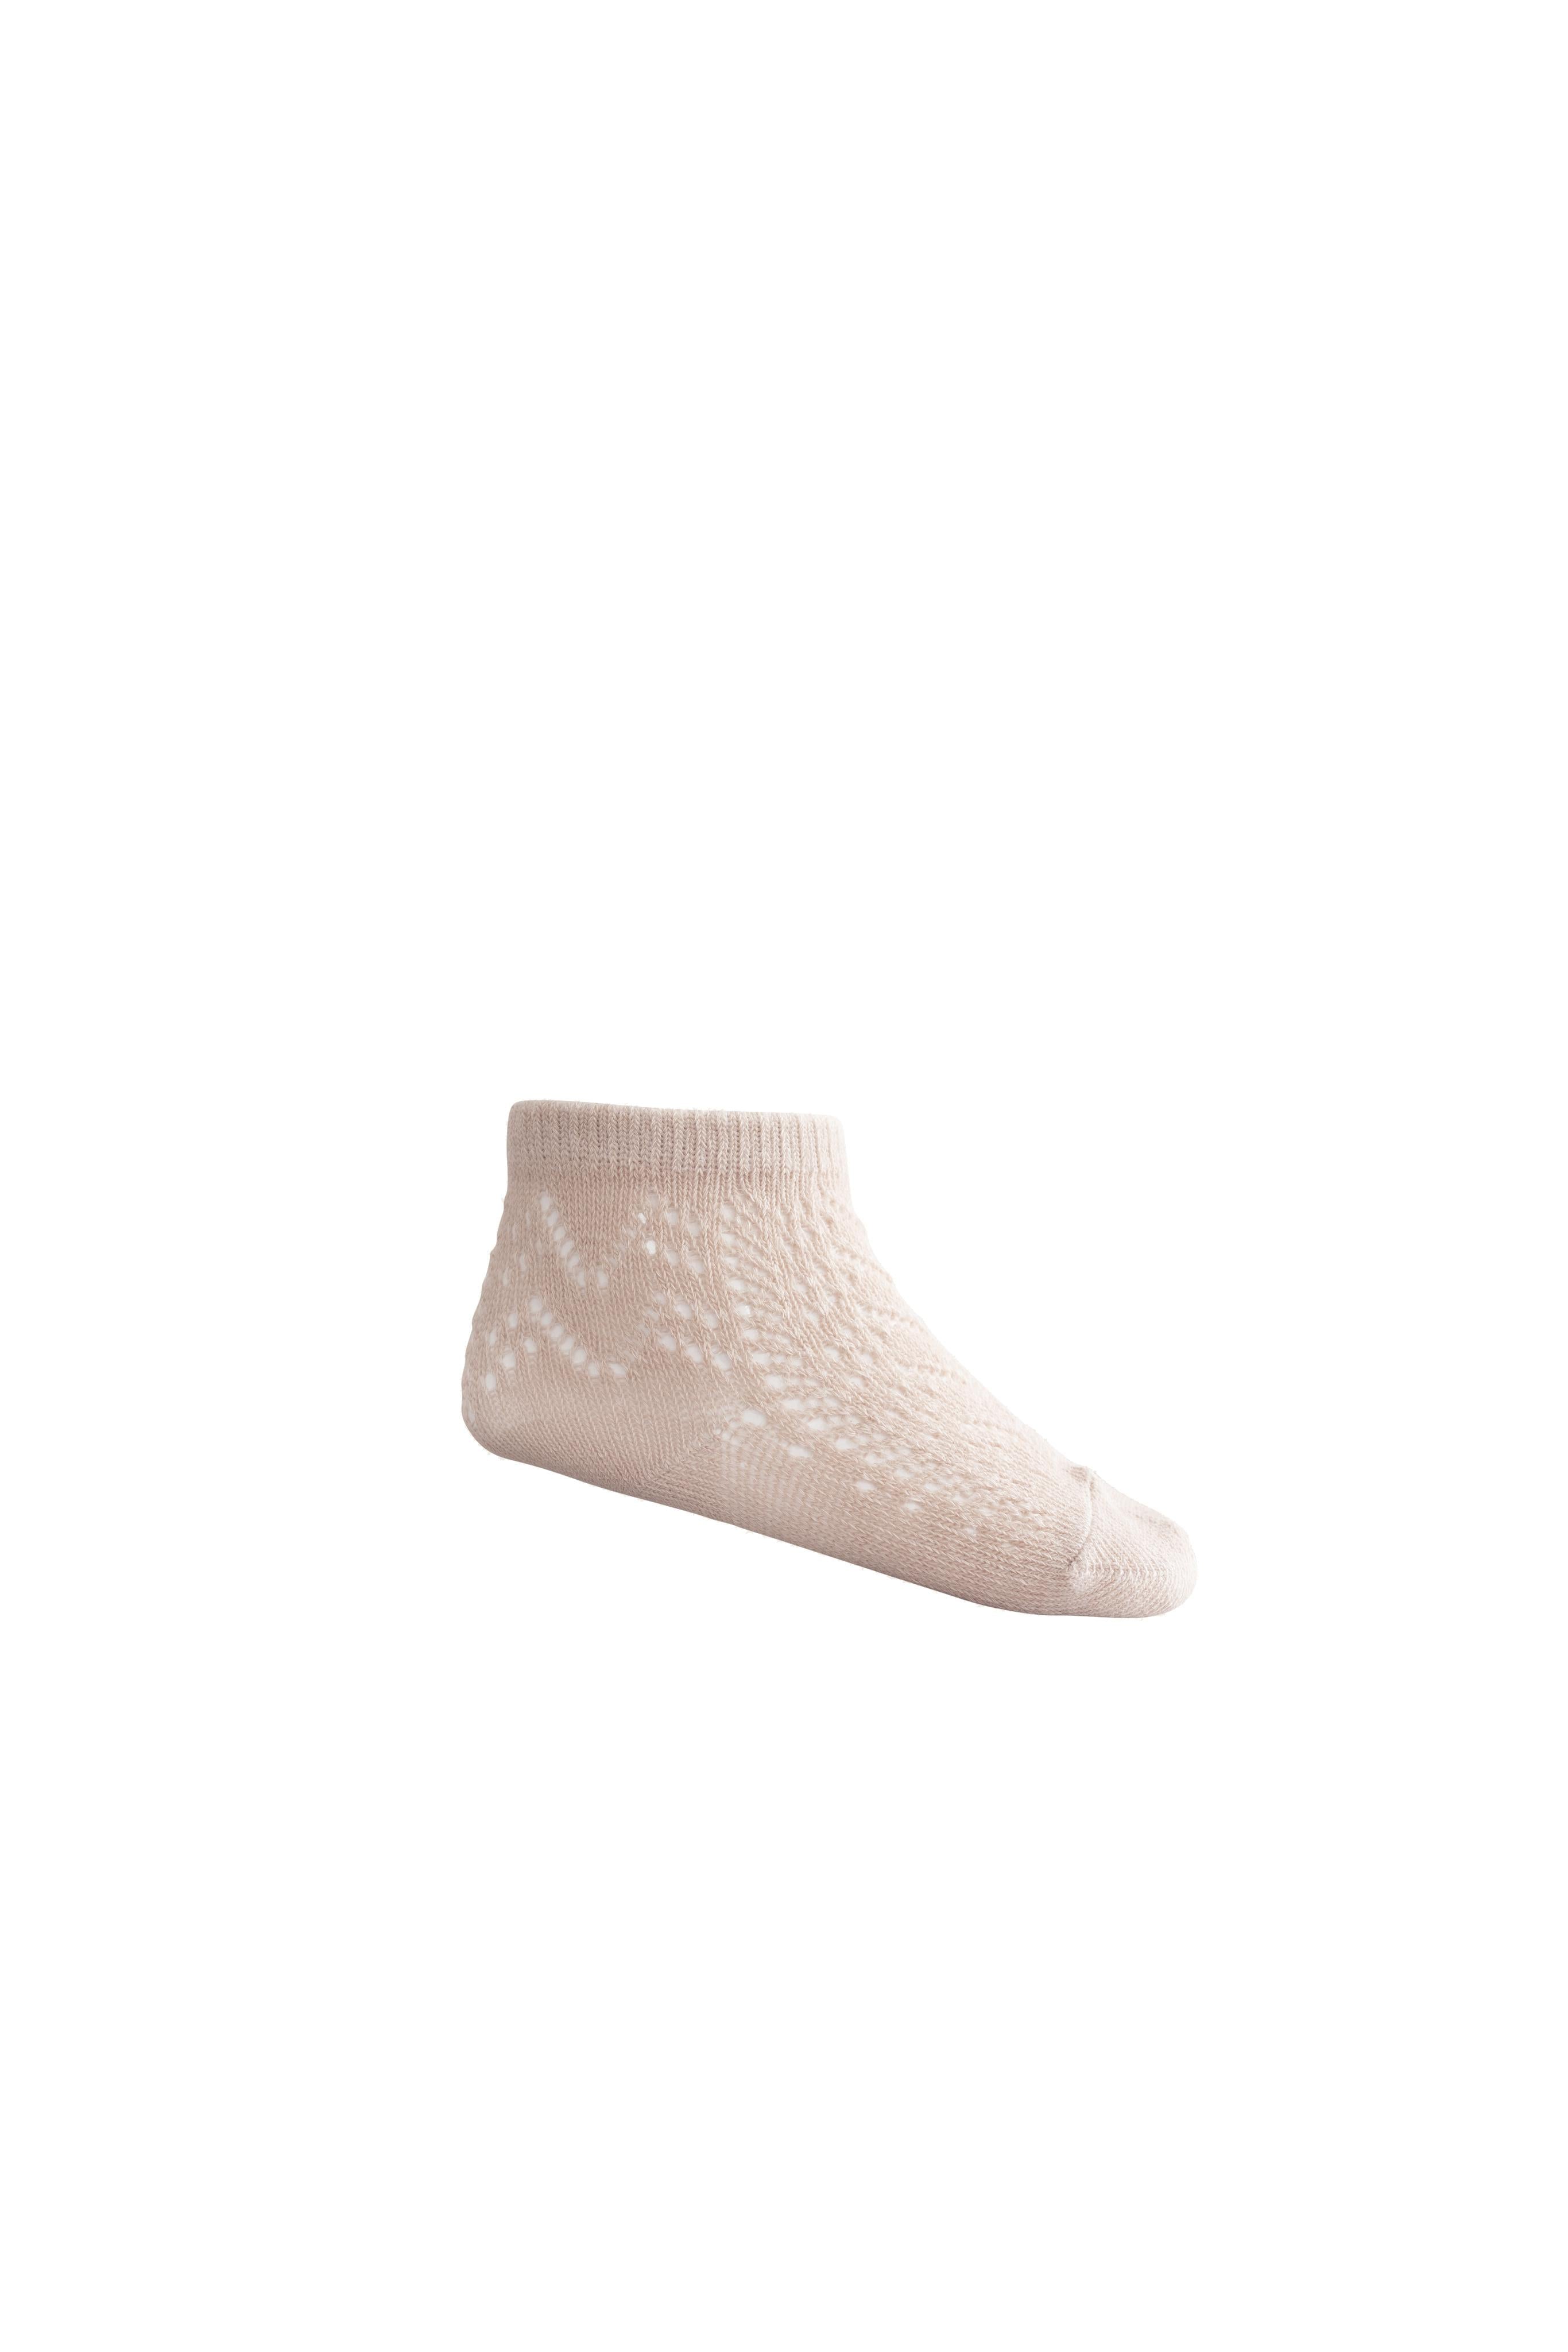 Cable Weave Ankle Sock - Pillow-Shoes & Socks-Jamie Kay-The Bay Room